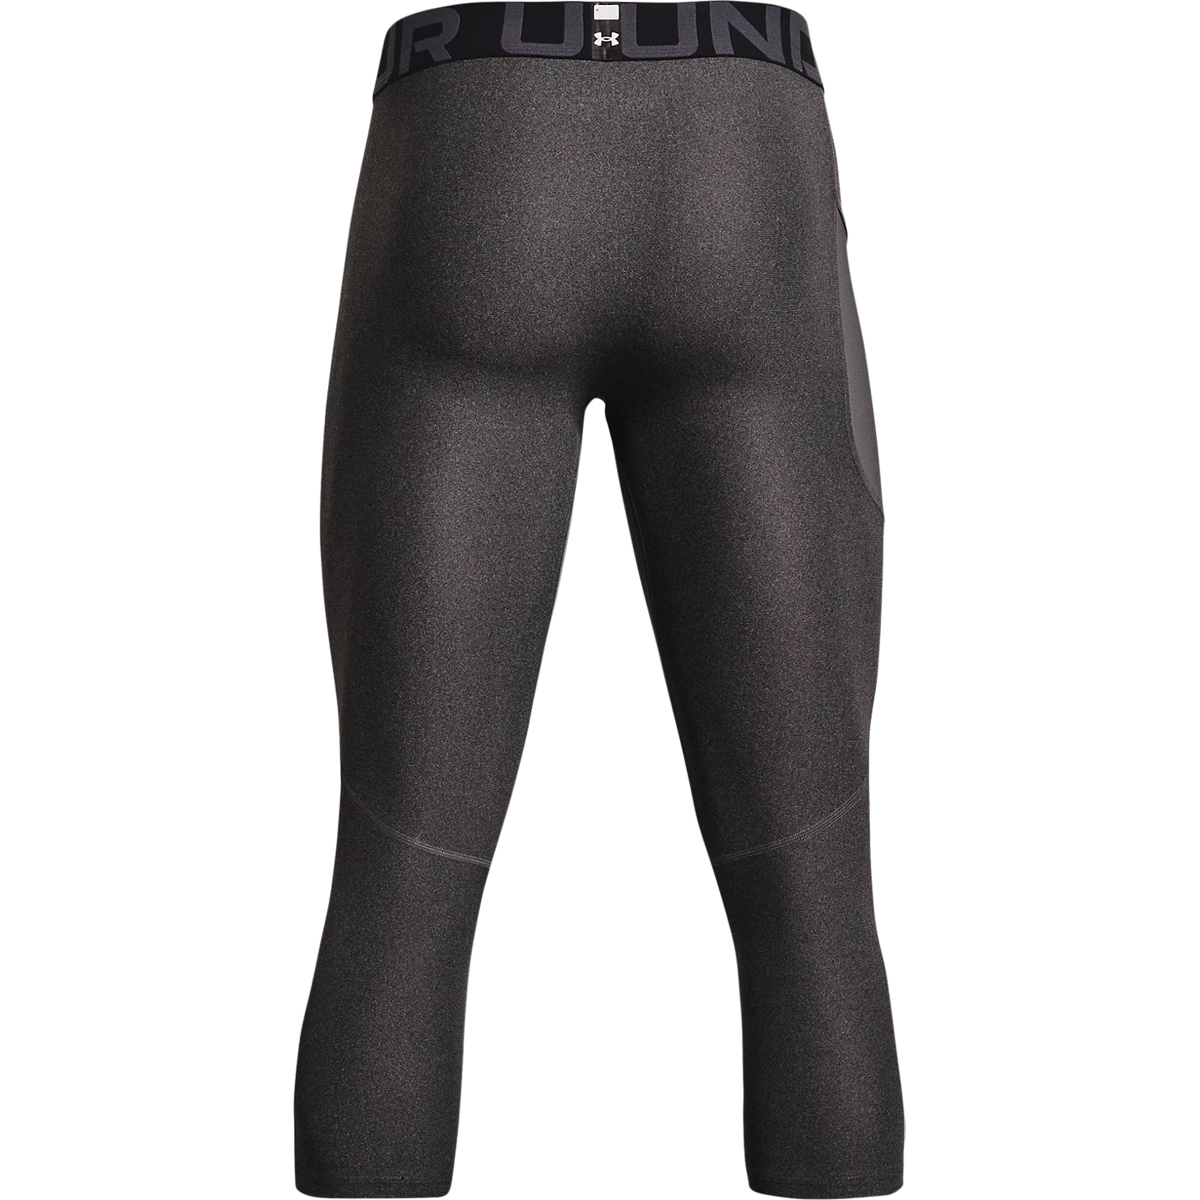 YLG boys Under Armour Boys HeatGear Armour ¾ Leggings tights fitted pants  black large L